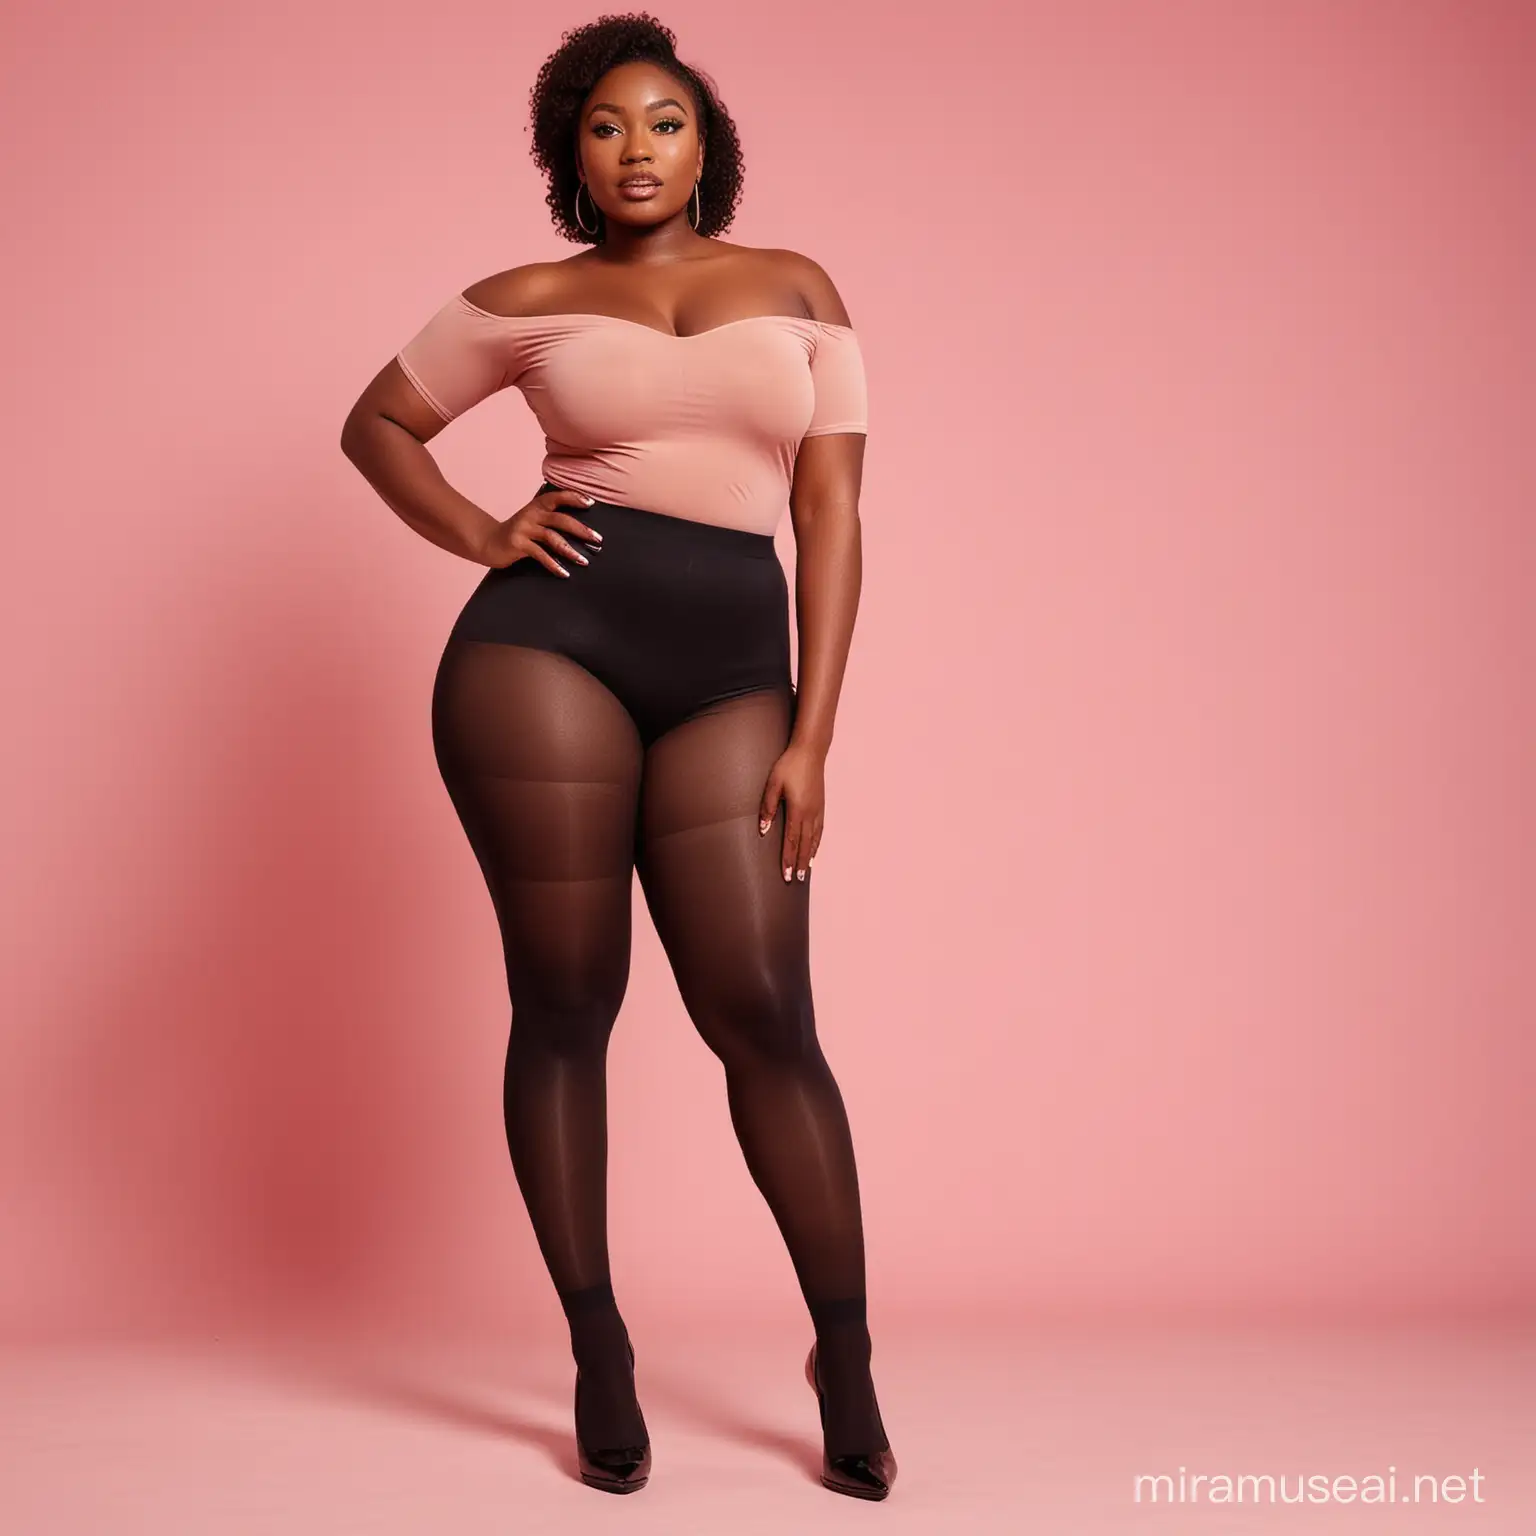 Plussize Nigerian Model in Black Pantyhose Tights on Pink Background